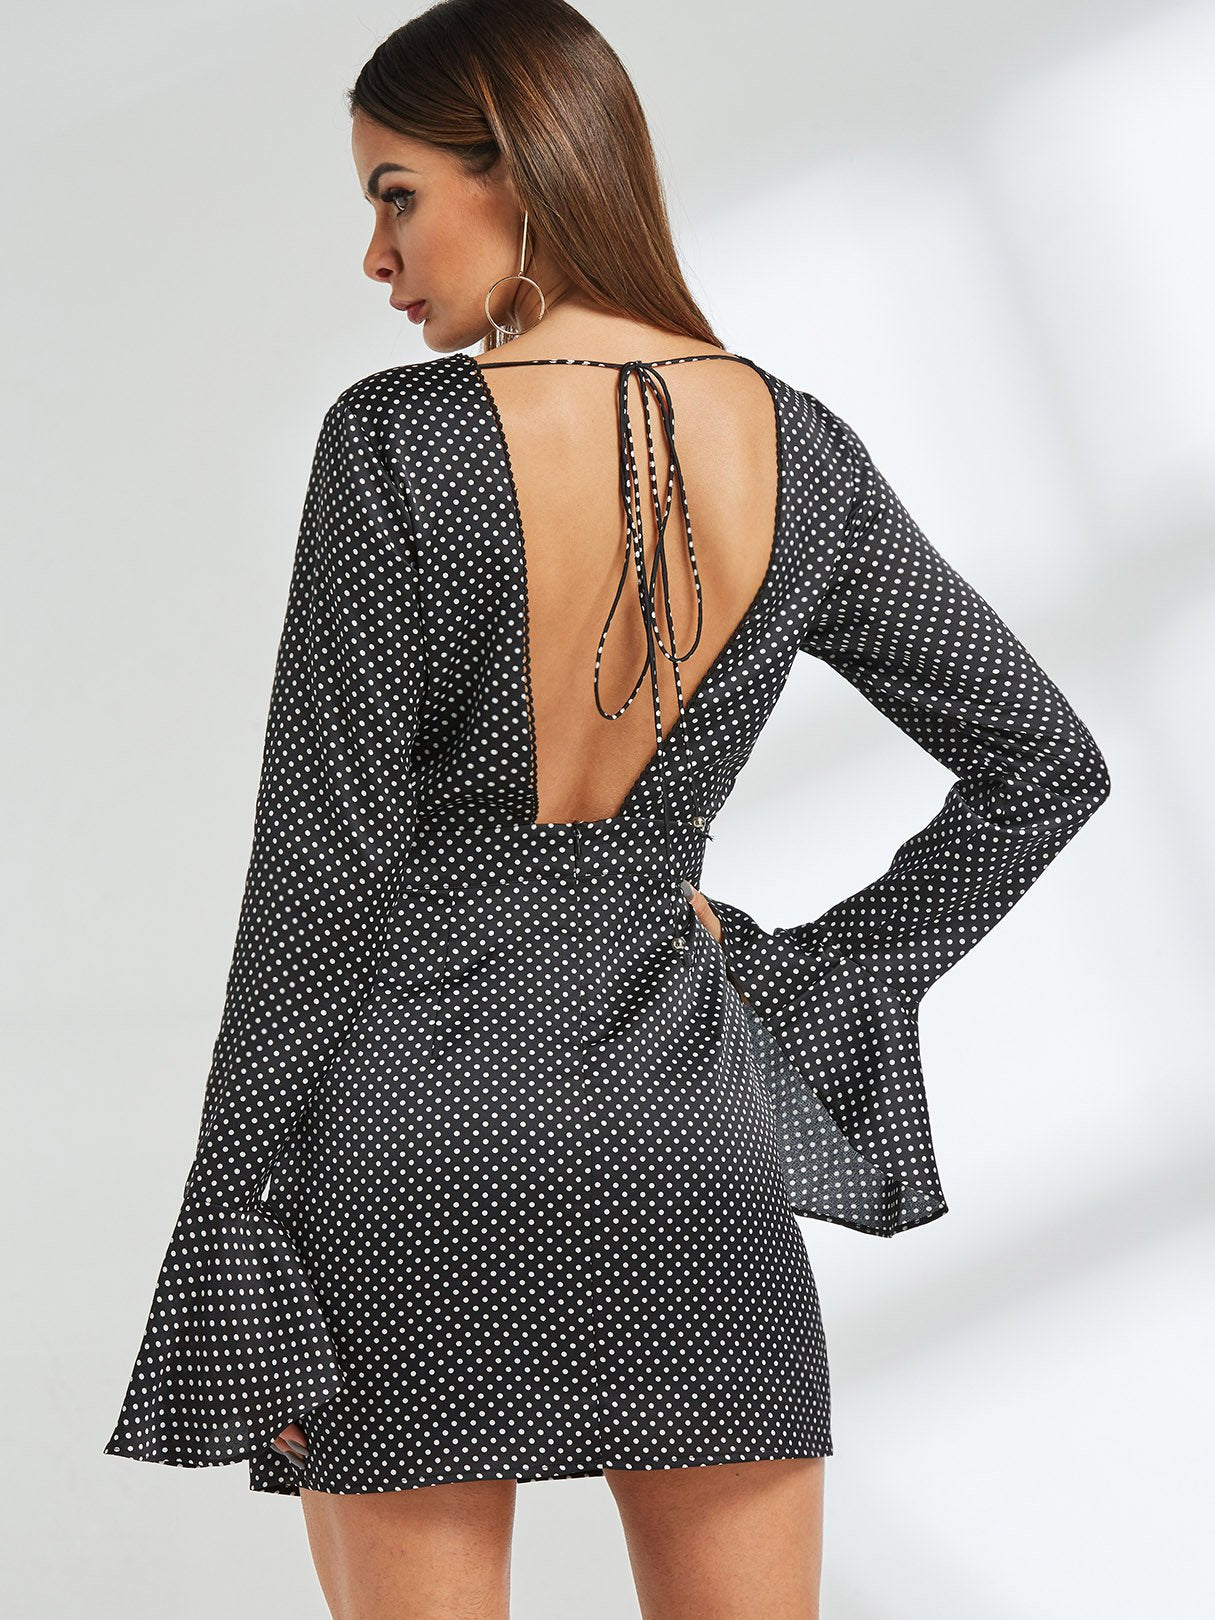 Backless Casual Dresses